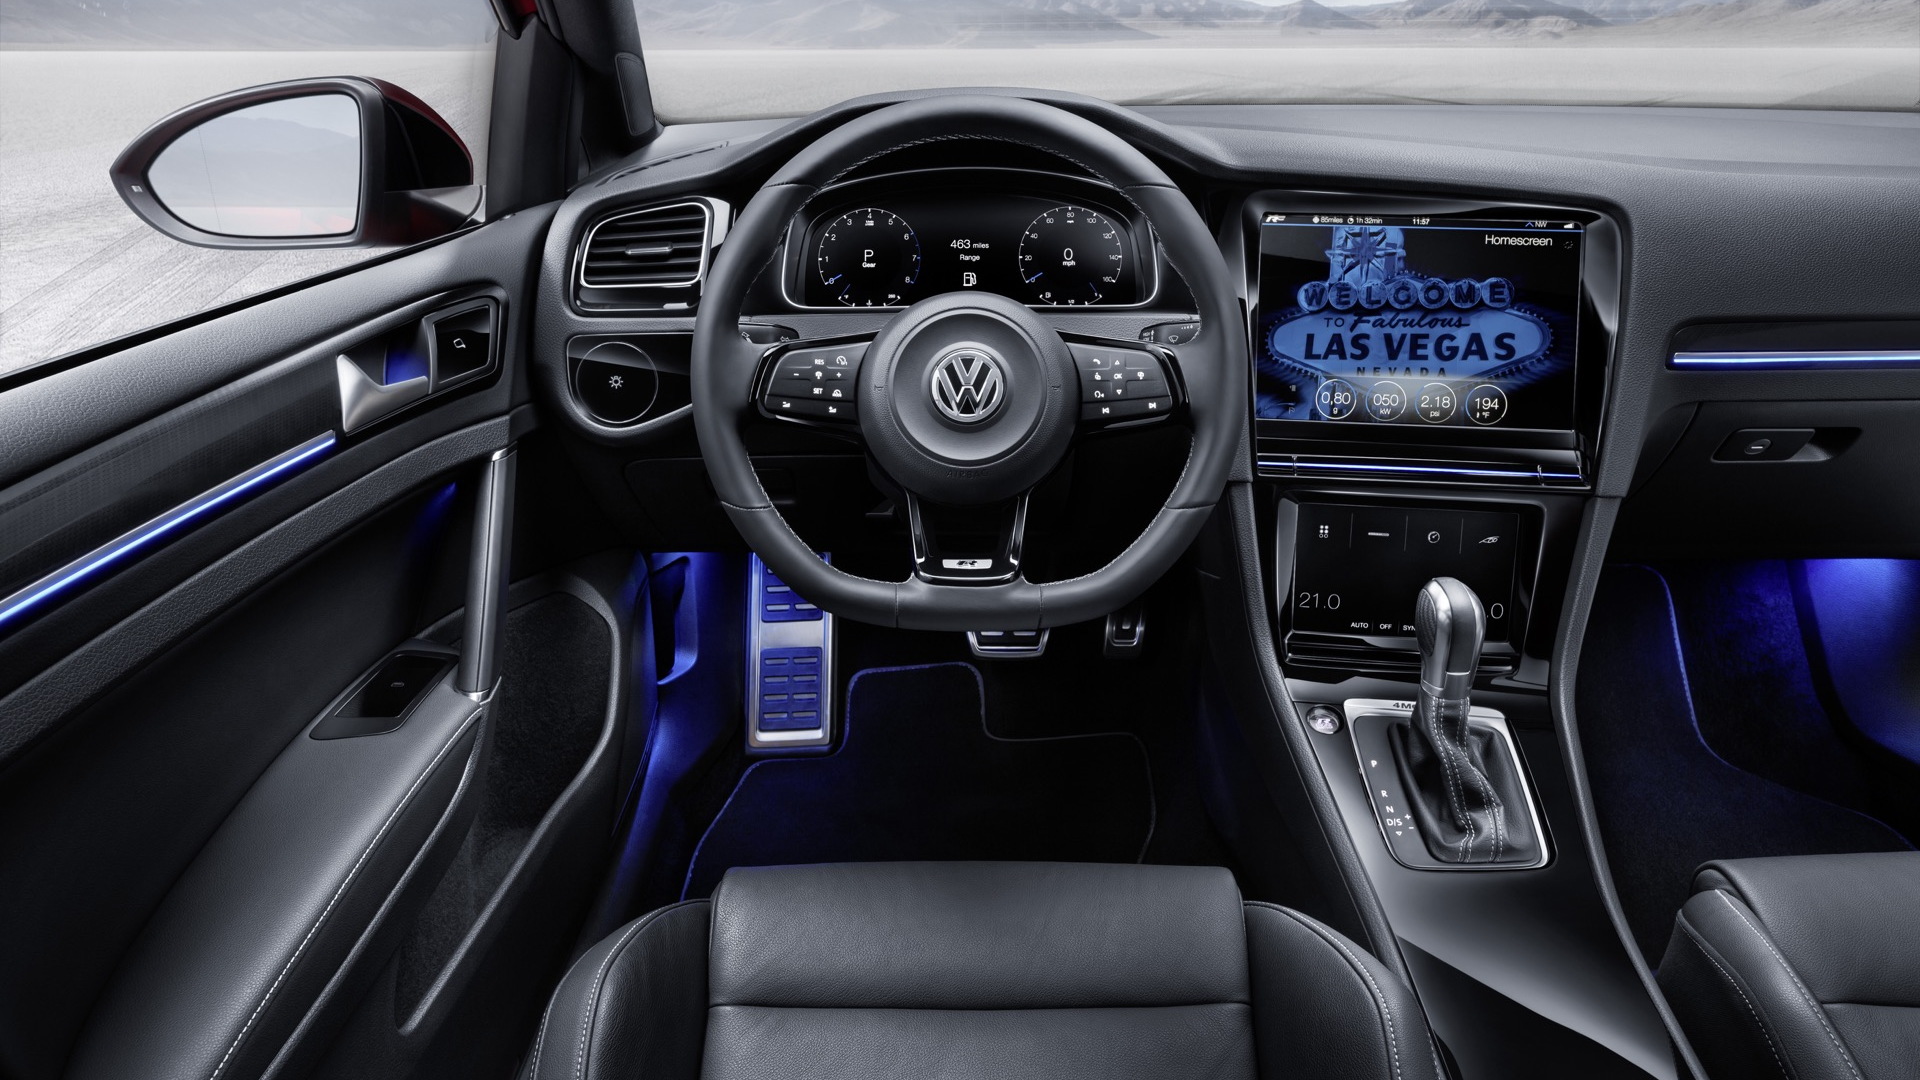 Volkswagen Golf R Touch concept, 2015 Consumer Electronics Show